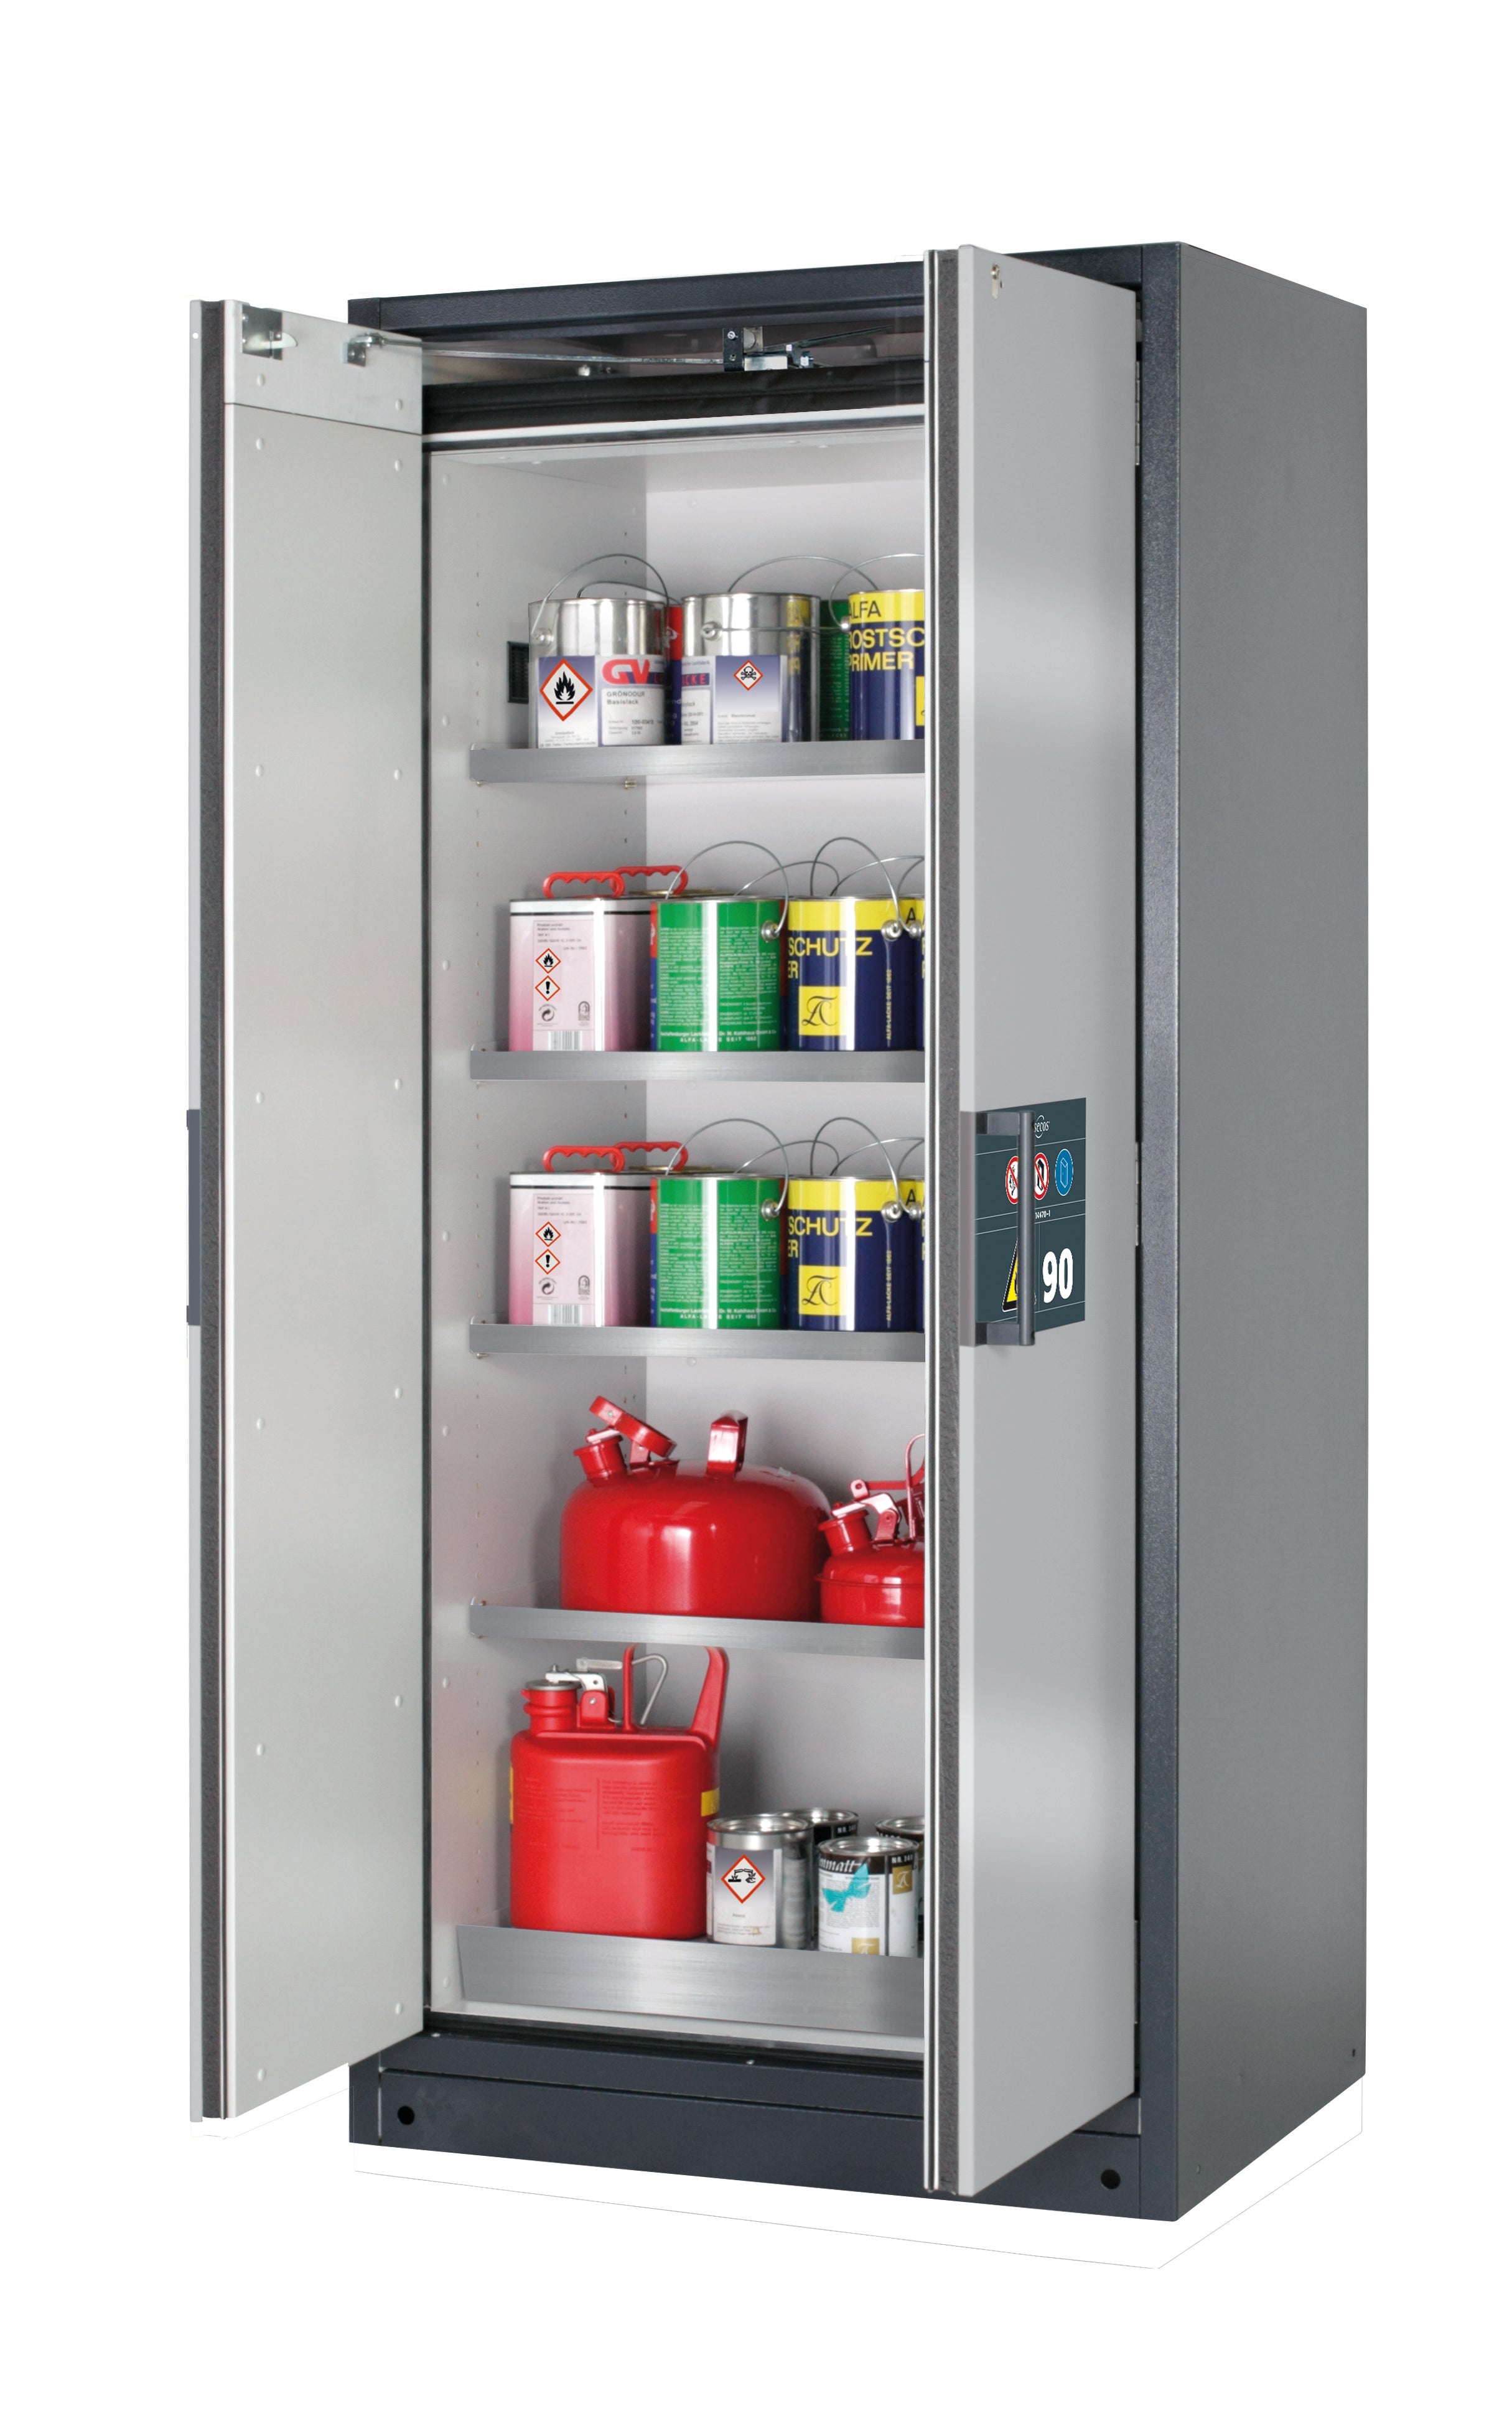 Type 90 safety storage cabinet Q-PEGASUS-90 model Q90.195.090.WDAC in asecos silver with 4x shelf standard (stainless steel 1.4301),